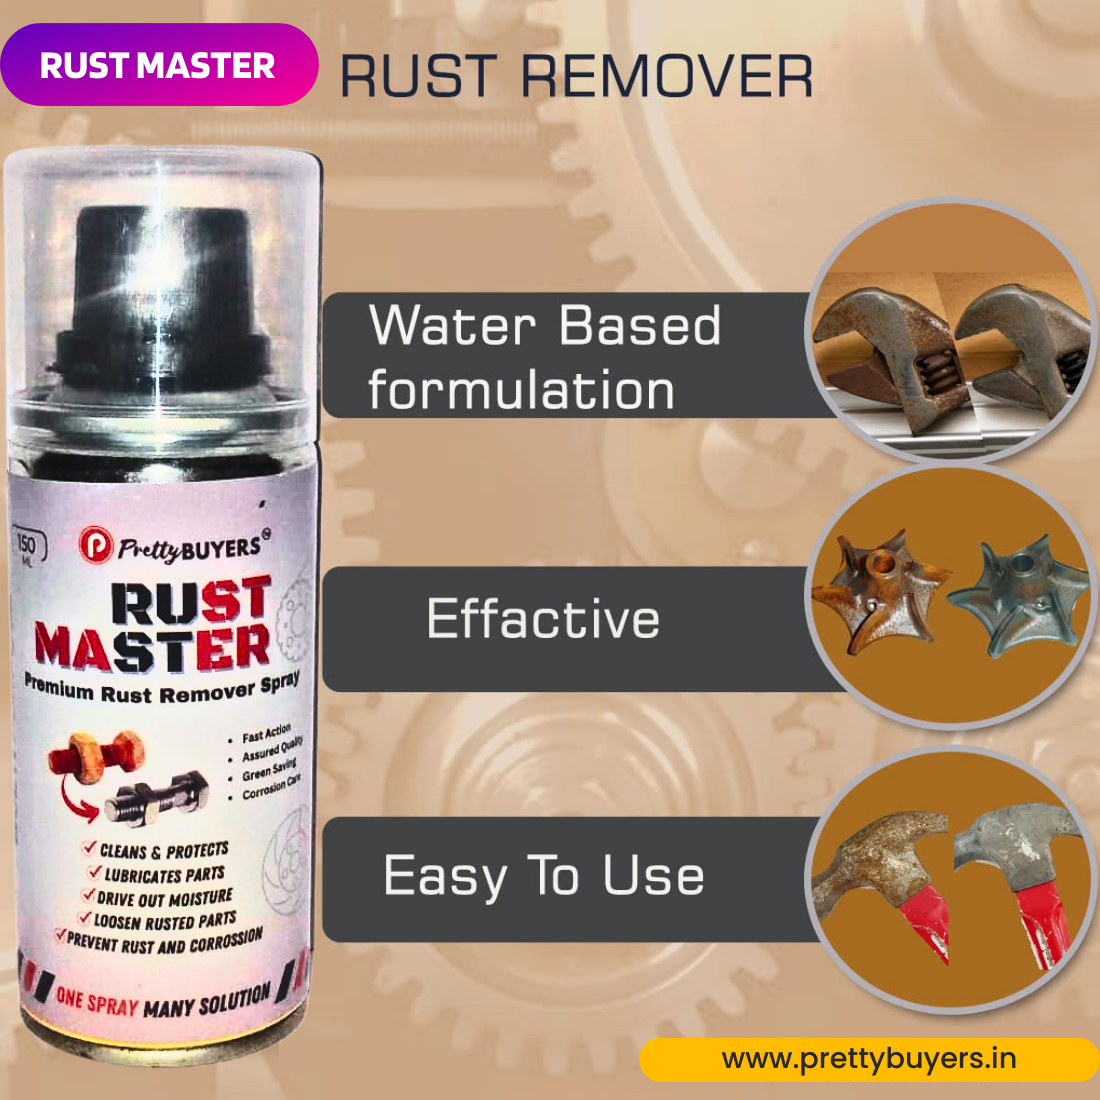 PrettyBUYERS RUST Master - Instant Rust Remover Spray (150 mlx4) | Removes Rust | Protects from Corrosion